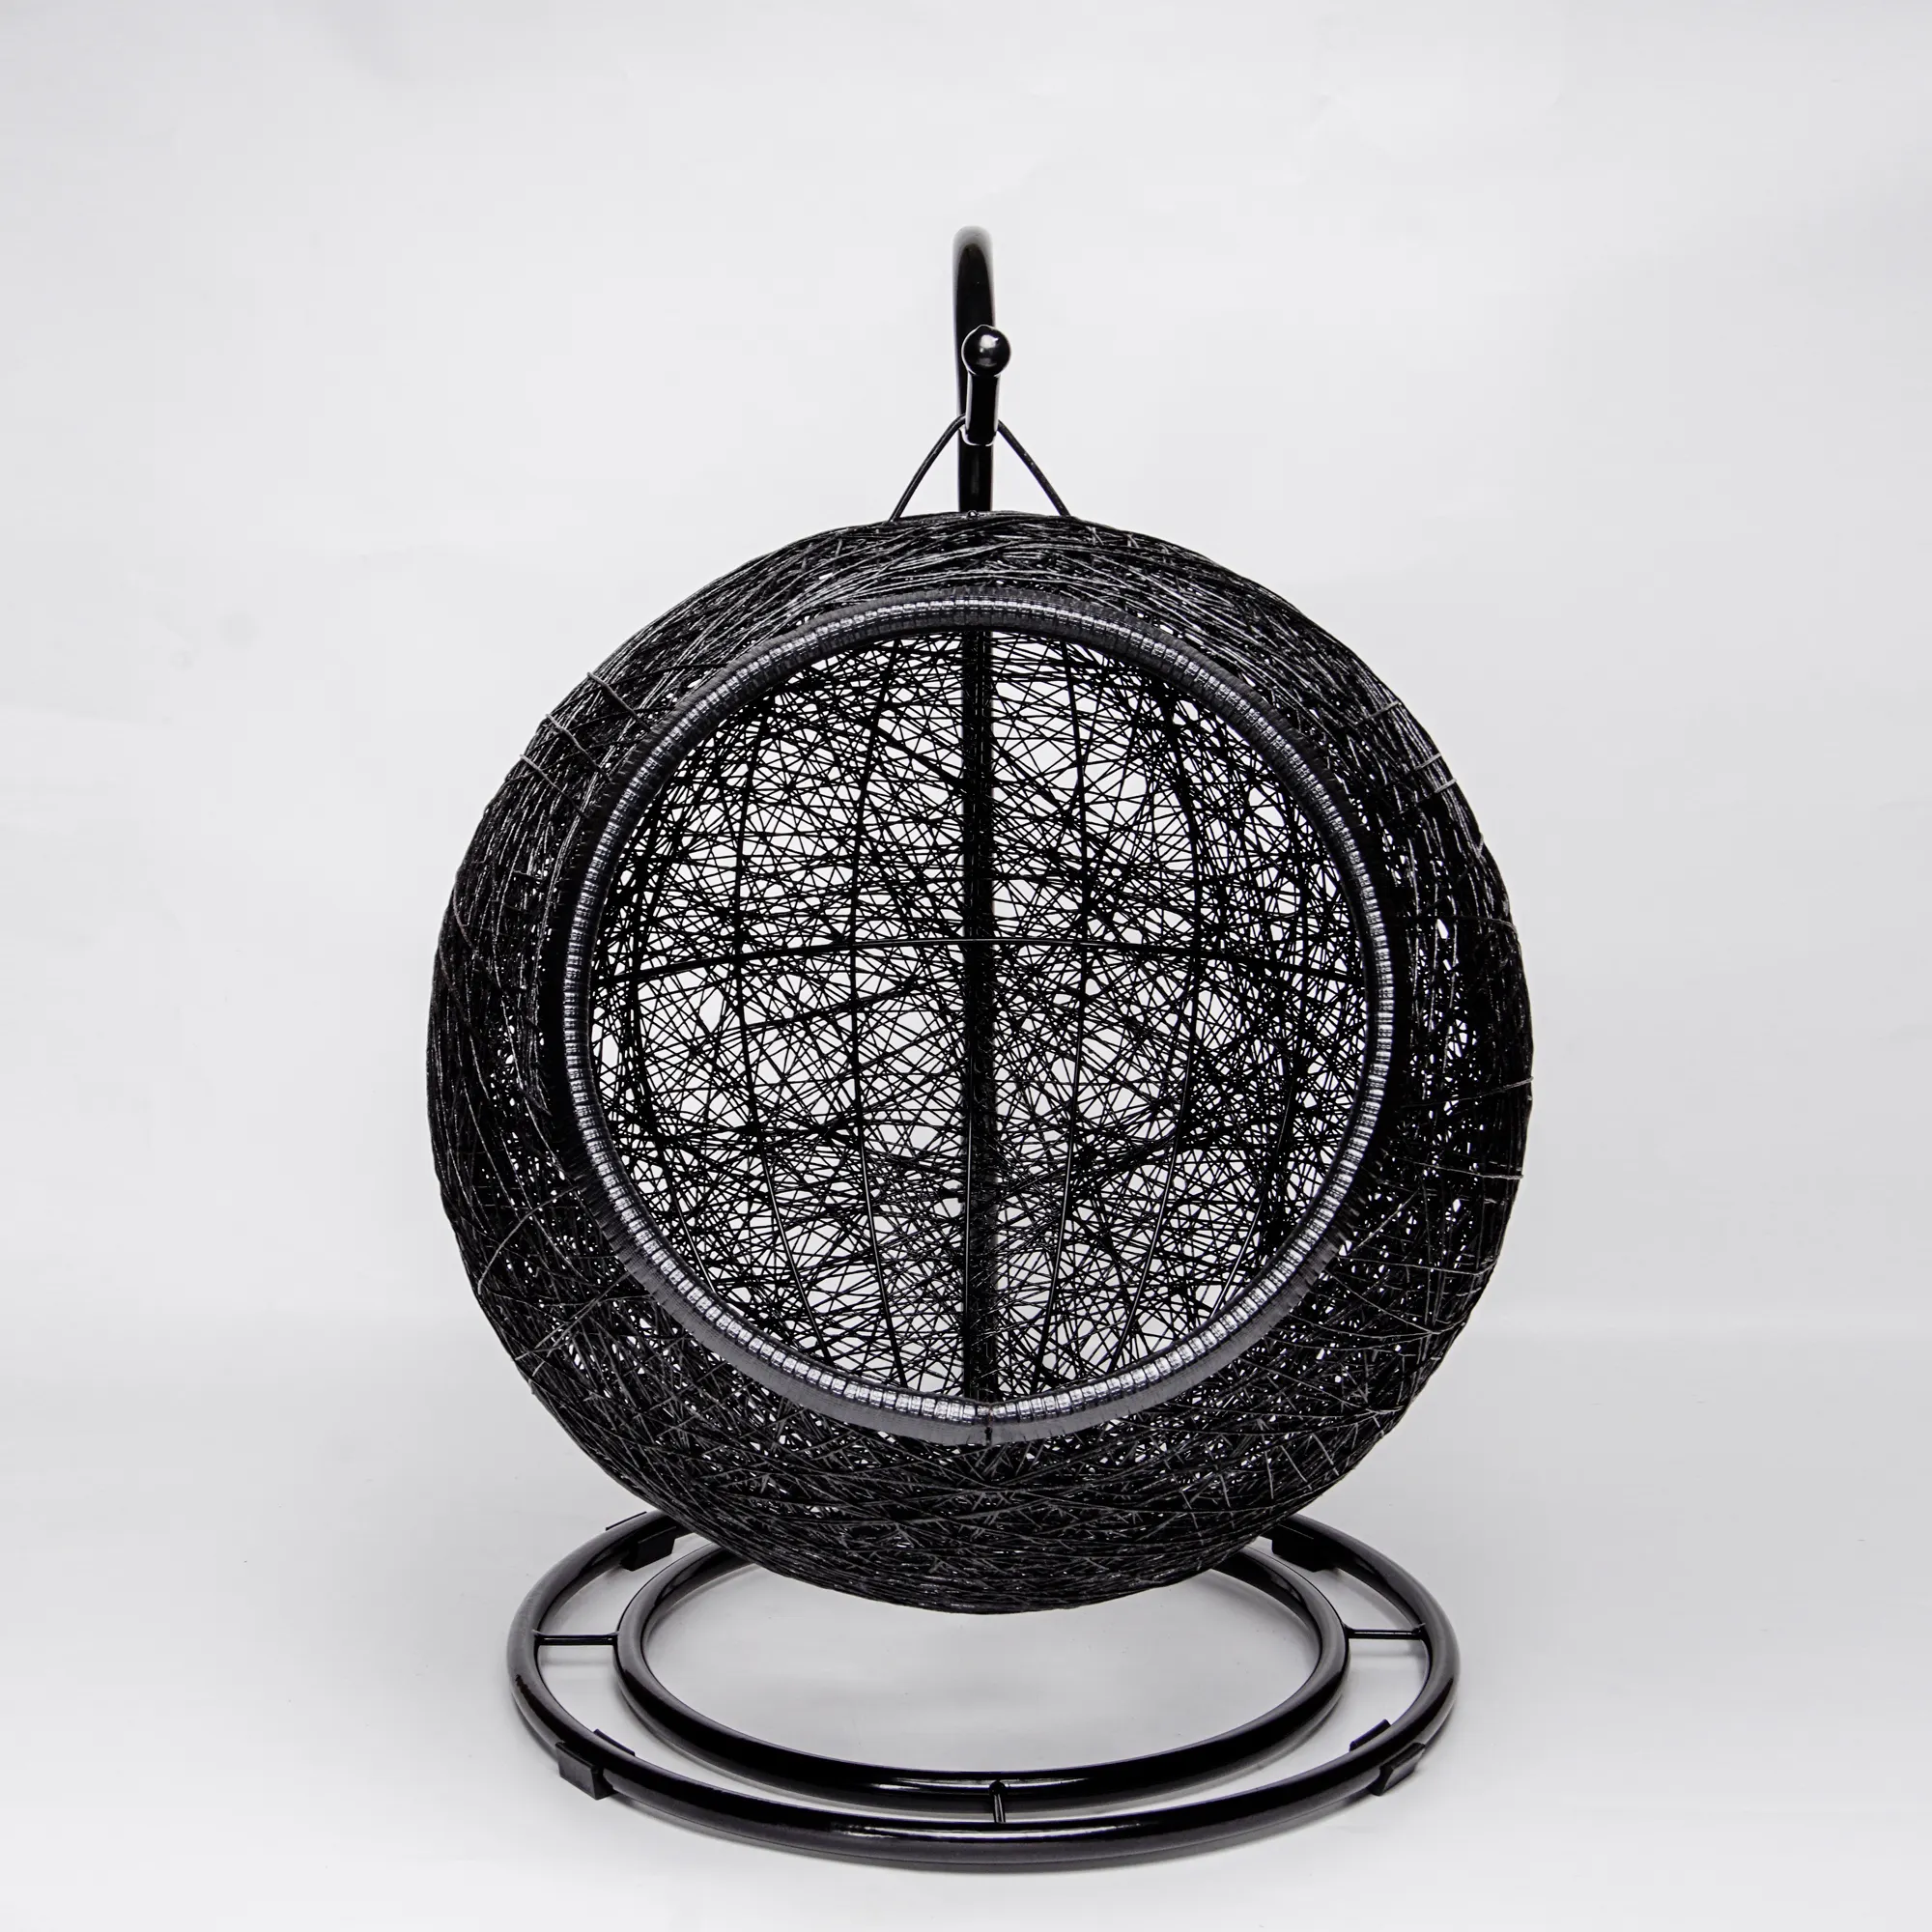 XH Paper Rope rattan Woven Hanging Hammock Egg Chair Lounge Chair Soft Deep Cushion with Hammock Stand for Cat Dog Pet Basket